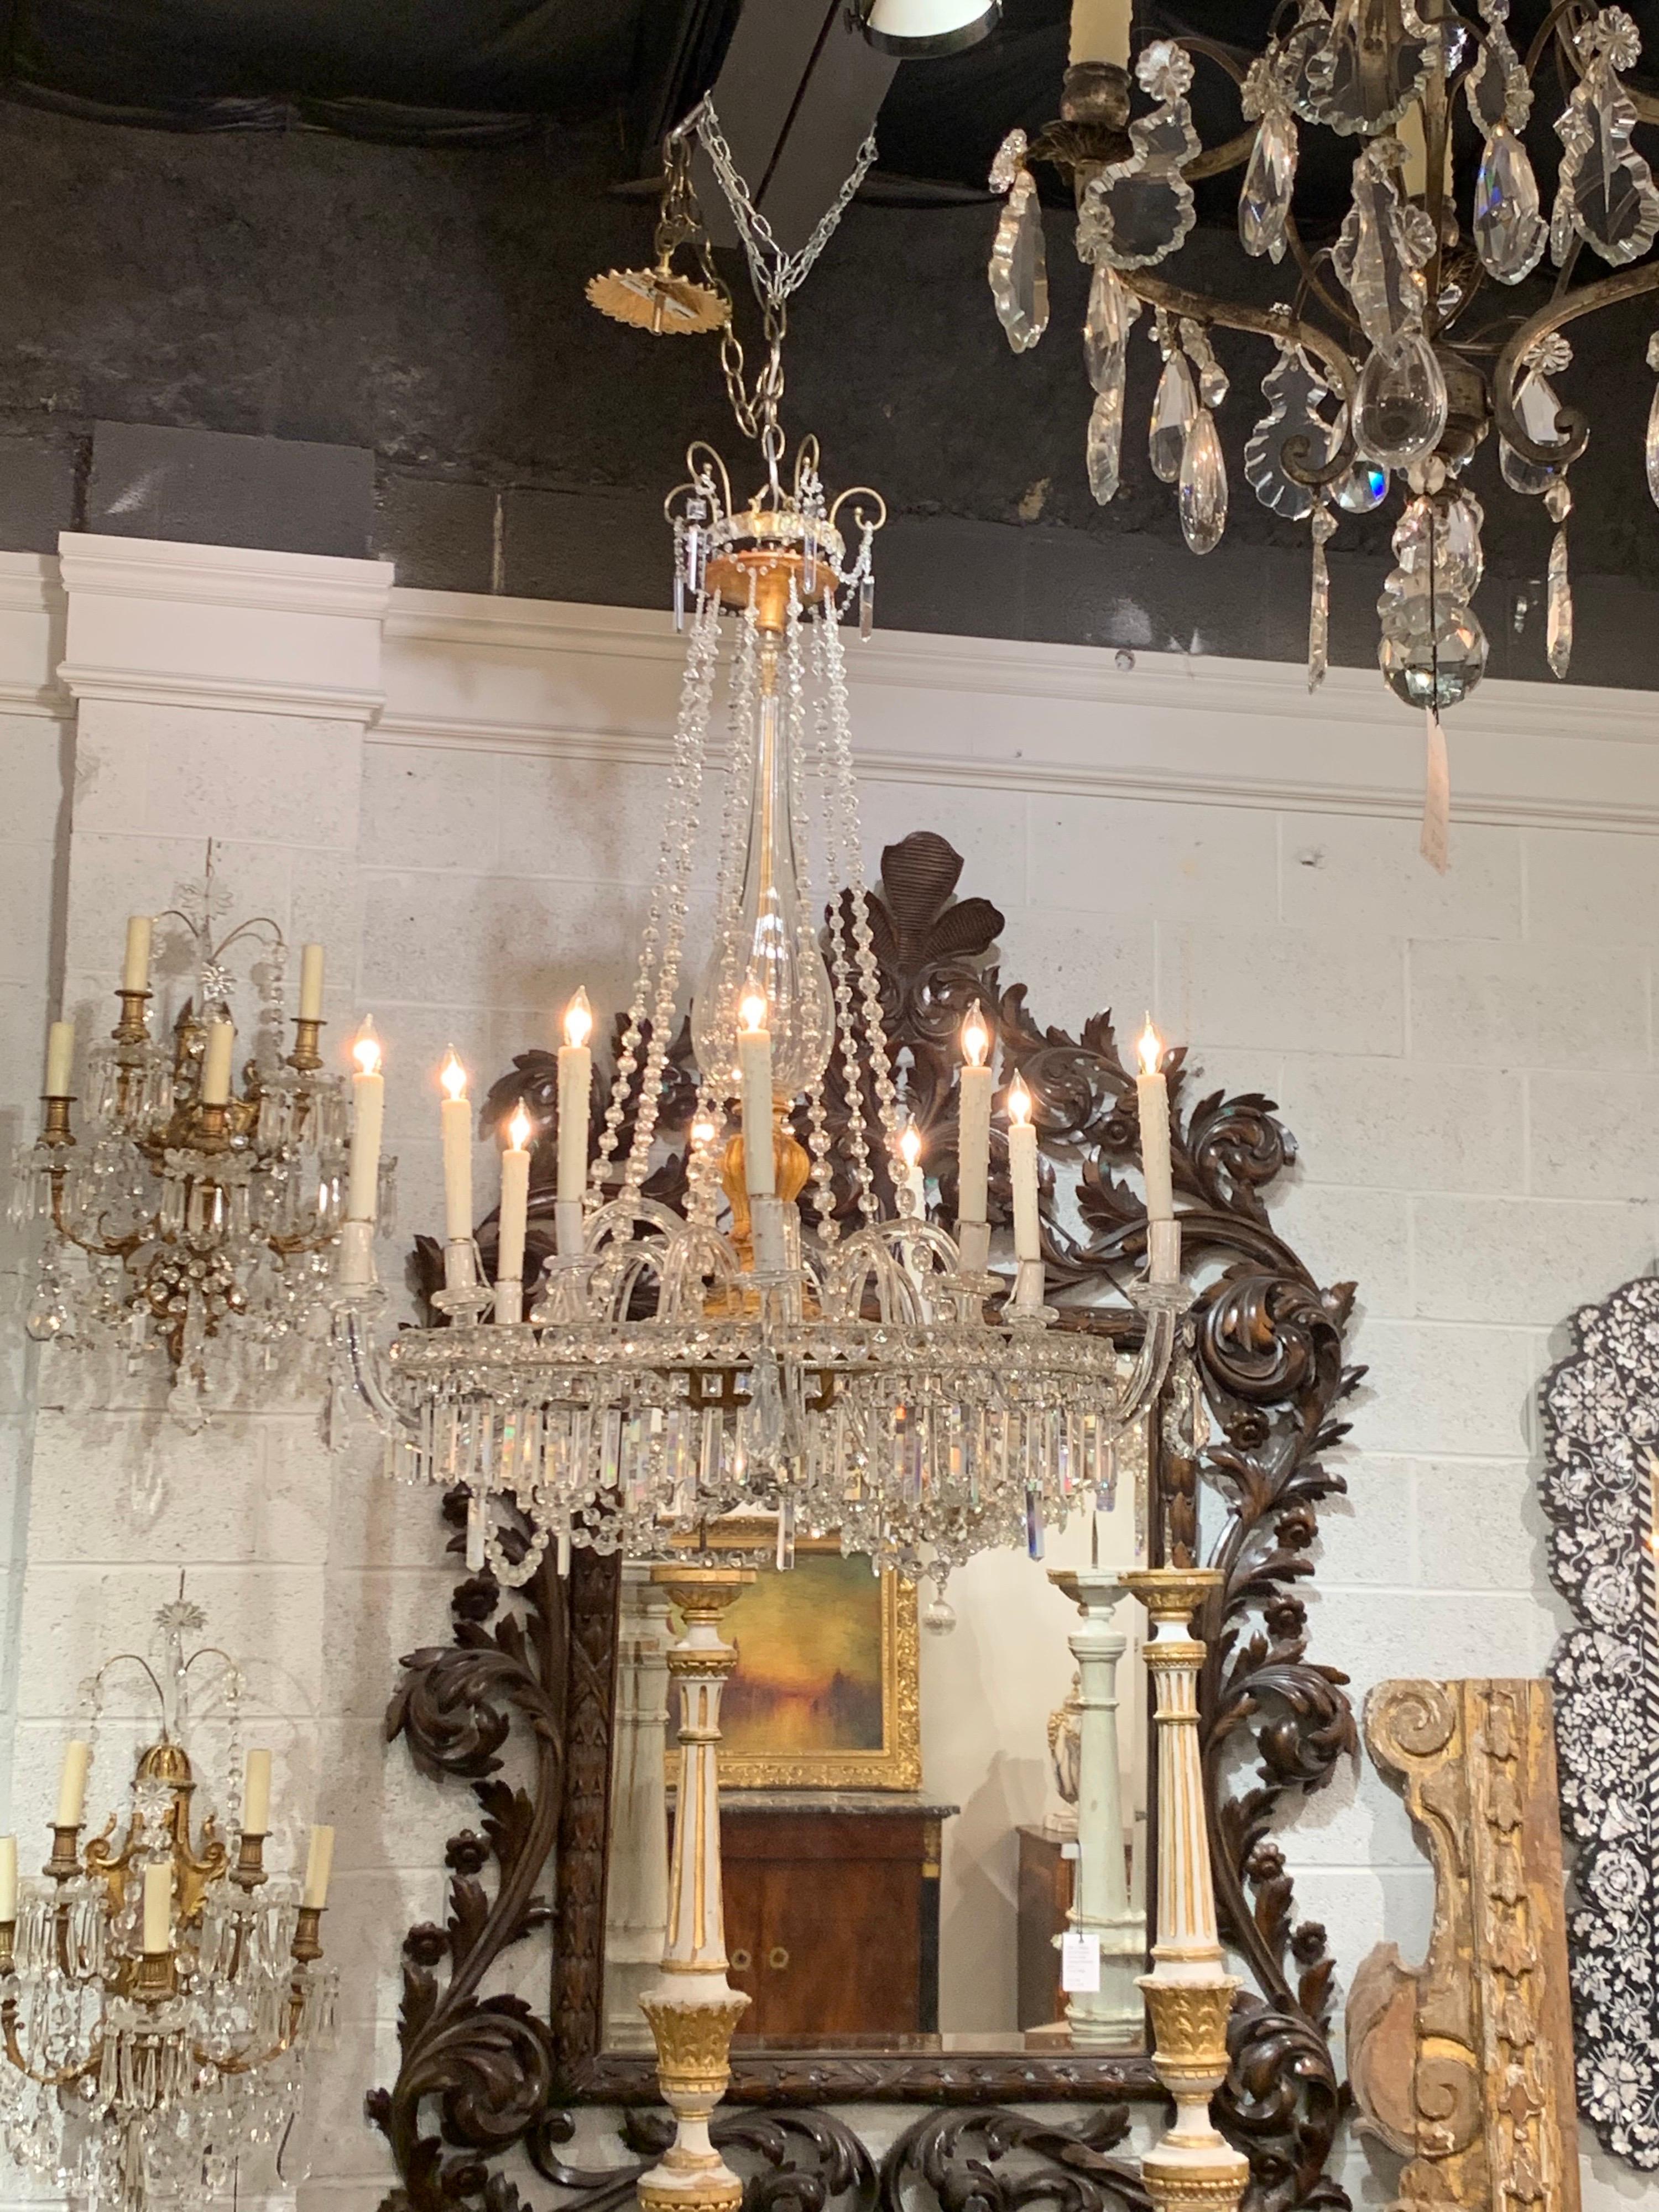 Elegant 19th century Italian giltwood and crystal chandelier with 10 lights. Pretty glass detail on the base and arms of the fixture along with gorgeous crystals. Very impressive!